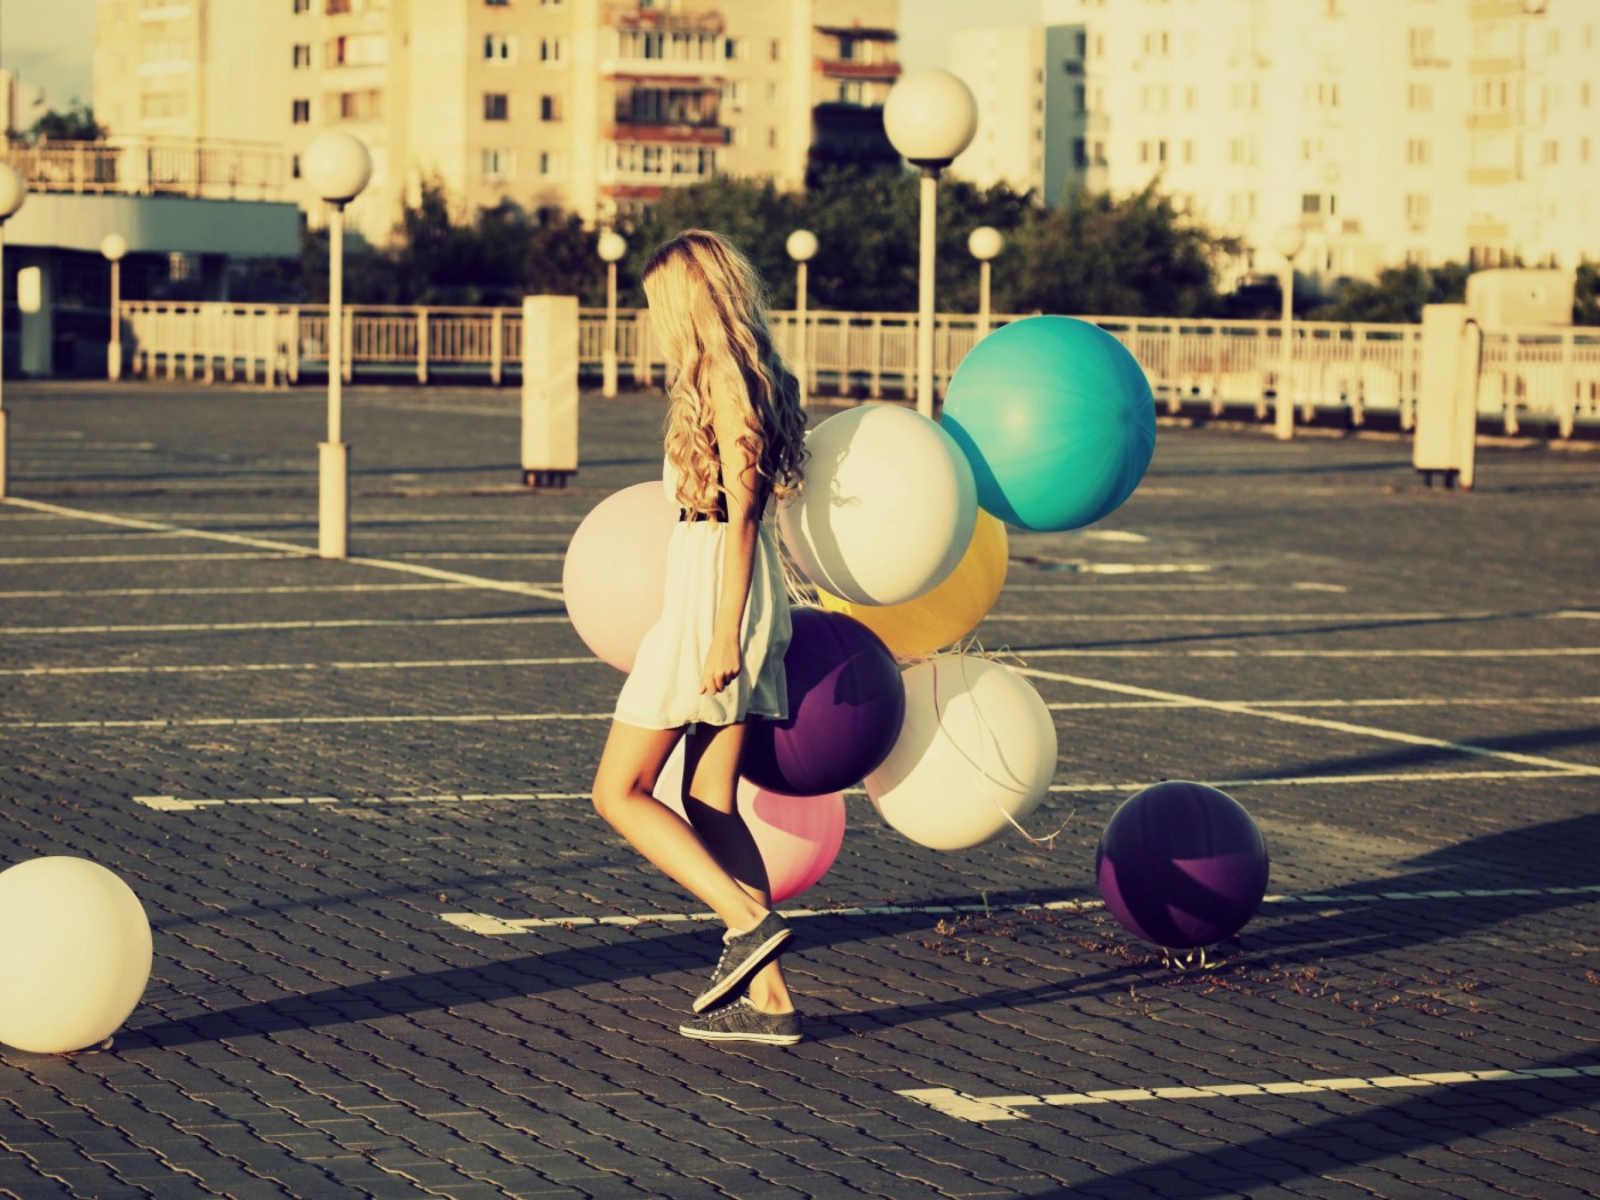 Happy Girl With Colorful Balloons wallpaper 1600x1200